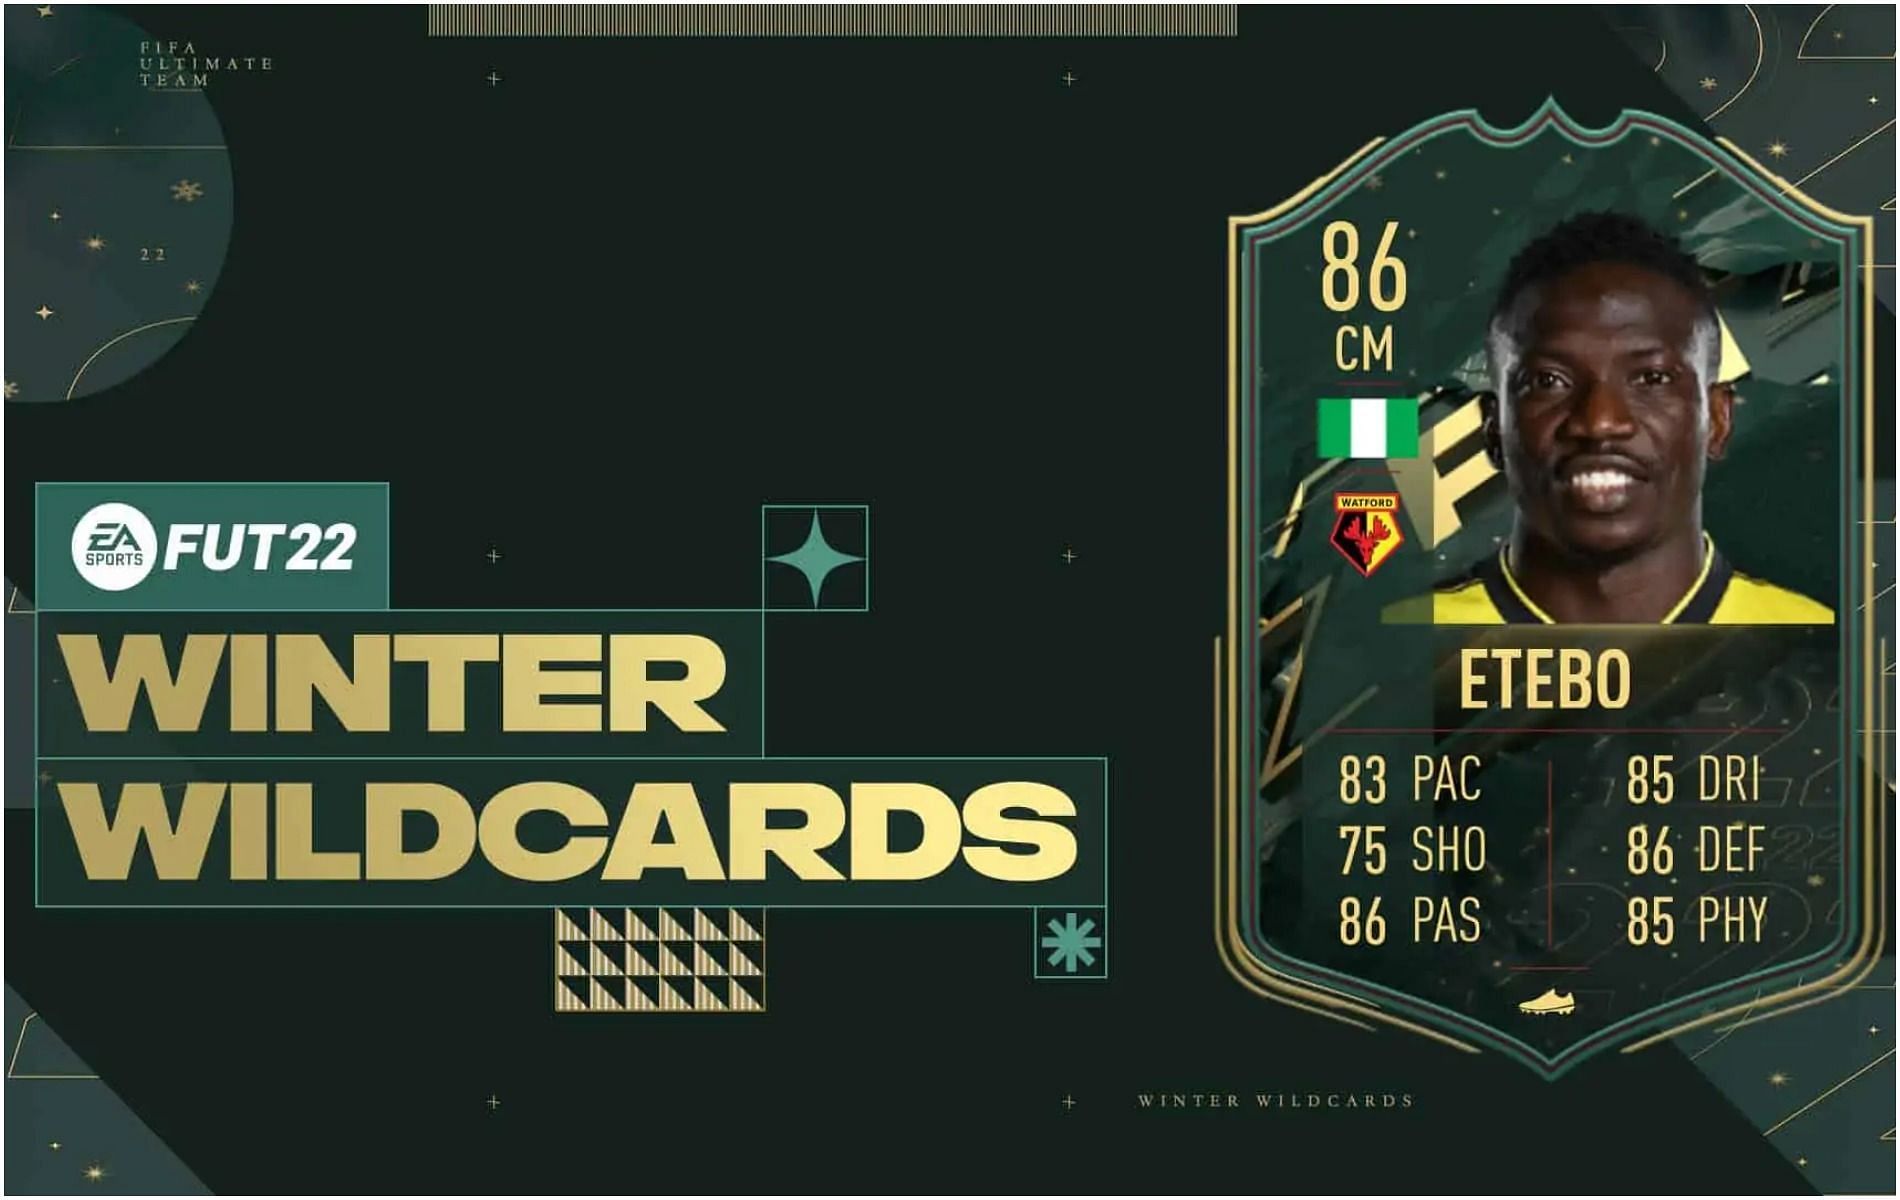 Winter Wildcards Oghenekaro Etebo SBC is now live in FIFA 22 Ultimate Team (Image via FIFA Saved My Life)